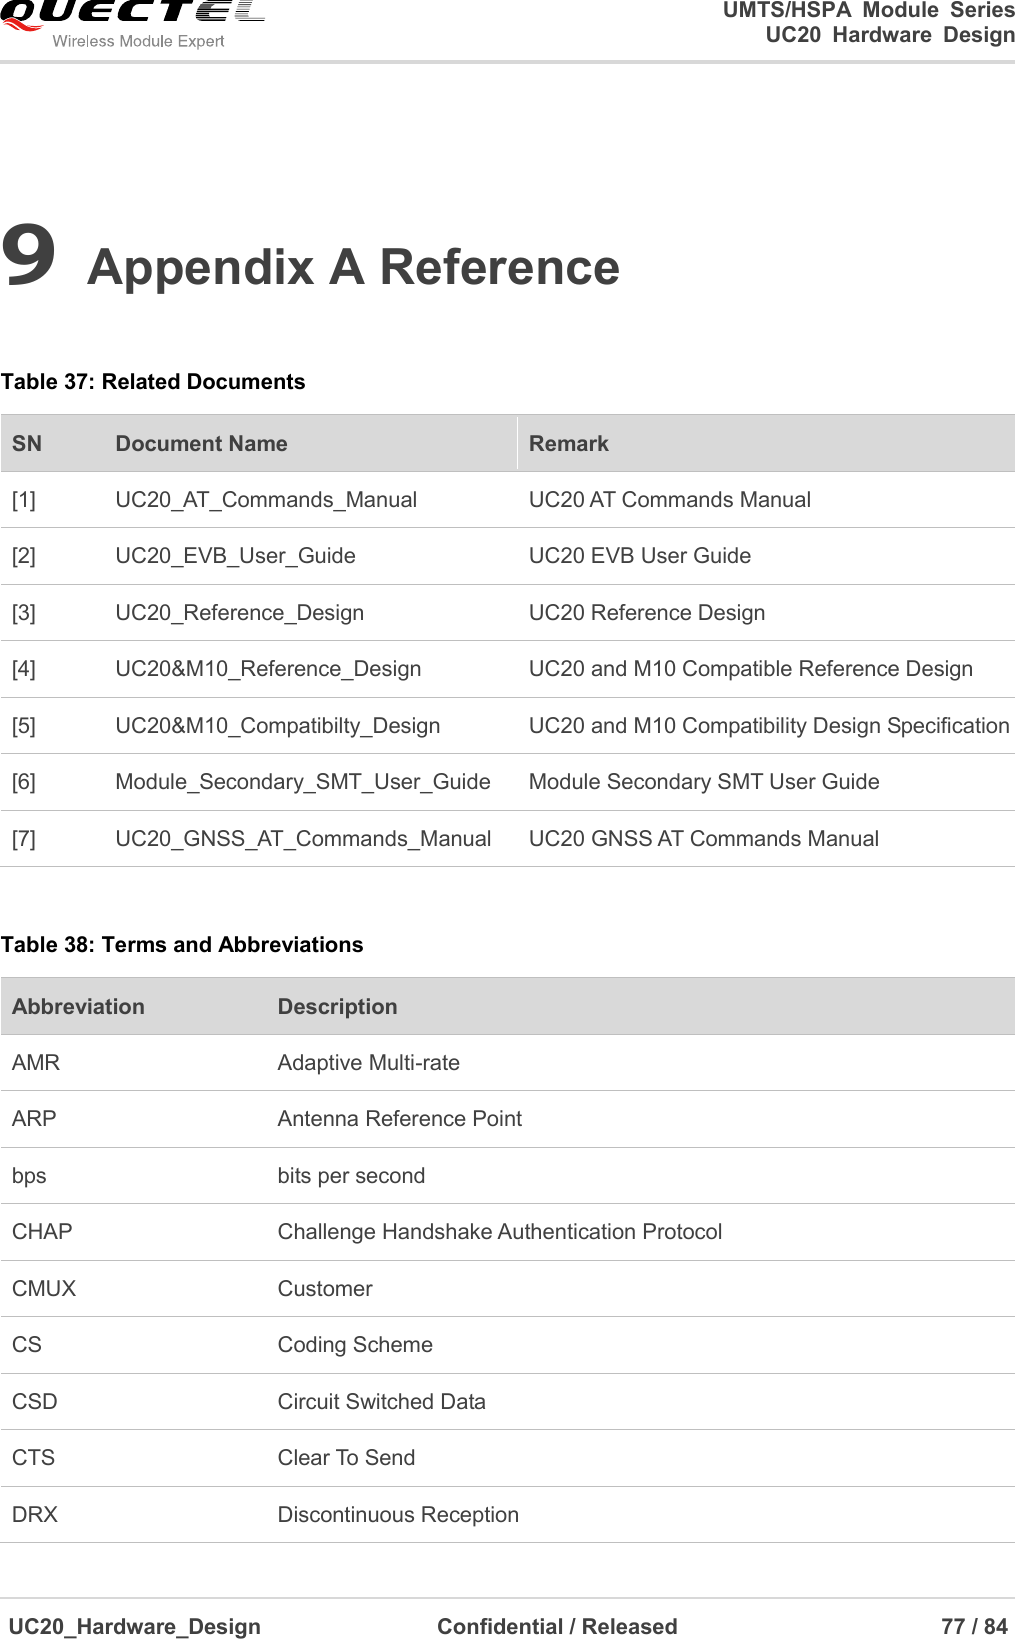                                                                                                                                               UMTS/HSPA  Module  Series                                                                 UC20  Hardware  Design  UC20_Hardware_Design                  Confidential / Released                            77 / 84     9 Appendix A Reference  Table 37: Related Documents   SN Document Name Remark [1] UC20_AT_Commands_Manual UC20 AT Commands Manual [2] UC20_EVB_User_Guide UC20 EVB User Guide [3] UC20_Reference_Design UC20 Reference Design [4] UC20&amp;M10_Reference_Design UC20 and M10 Compatible Reference Design [5] UC20&amp;M10_Compatibilty_Design UC20 and M10 Compatibility Design Specification [6] Module_Secondary_SMT_User_Guide Module Secondary SMT User Guide [7] UC20_GNSS_AT_Commands_Manual UC20 GNSS AT Commands Manual  Table 38: Terms and Abbreviations   Abbreviation Description AMR Adaptive Multi-rate ARP   Antenna Reference Point bps bits per second CHAP   Challenge Handshake Authentication Protocol CMUX Customer CS   Coding Scheme CSD   Circuit Switched Data CTS   Clear To Send DRX   Discontinuous Reception 